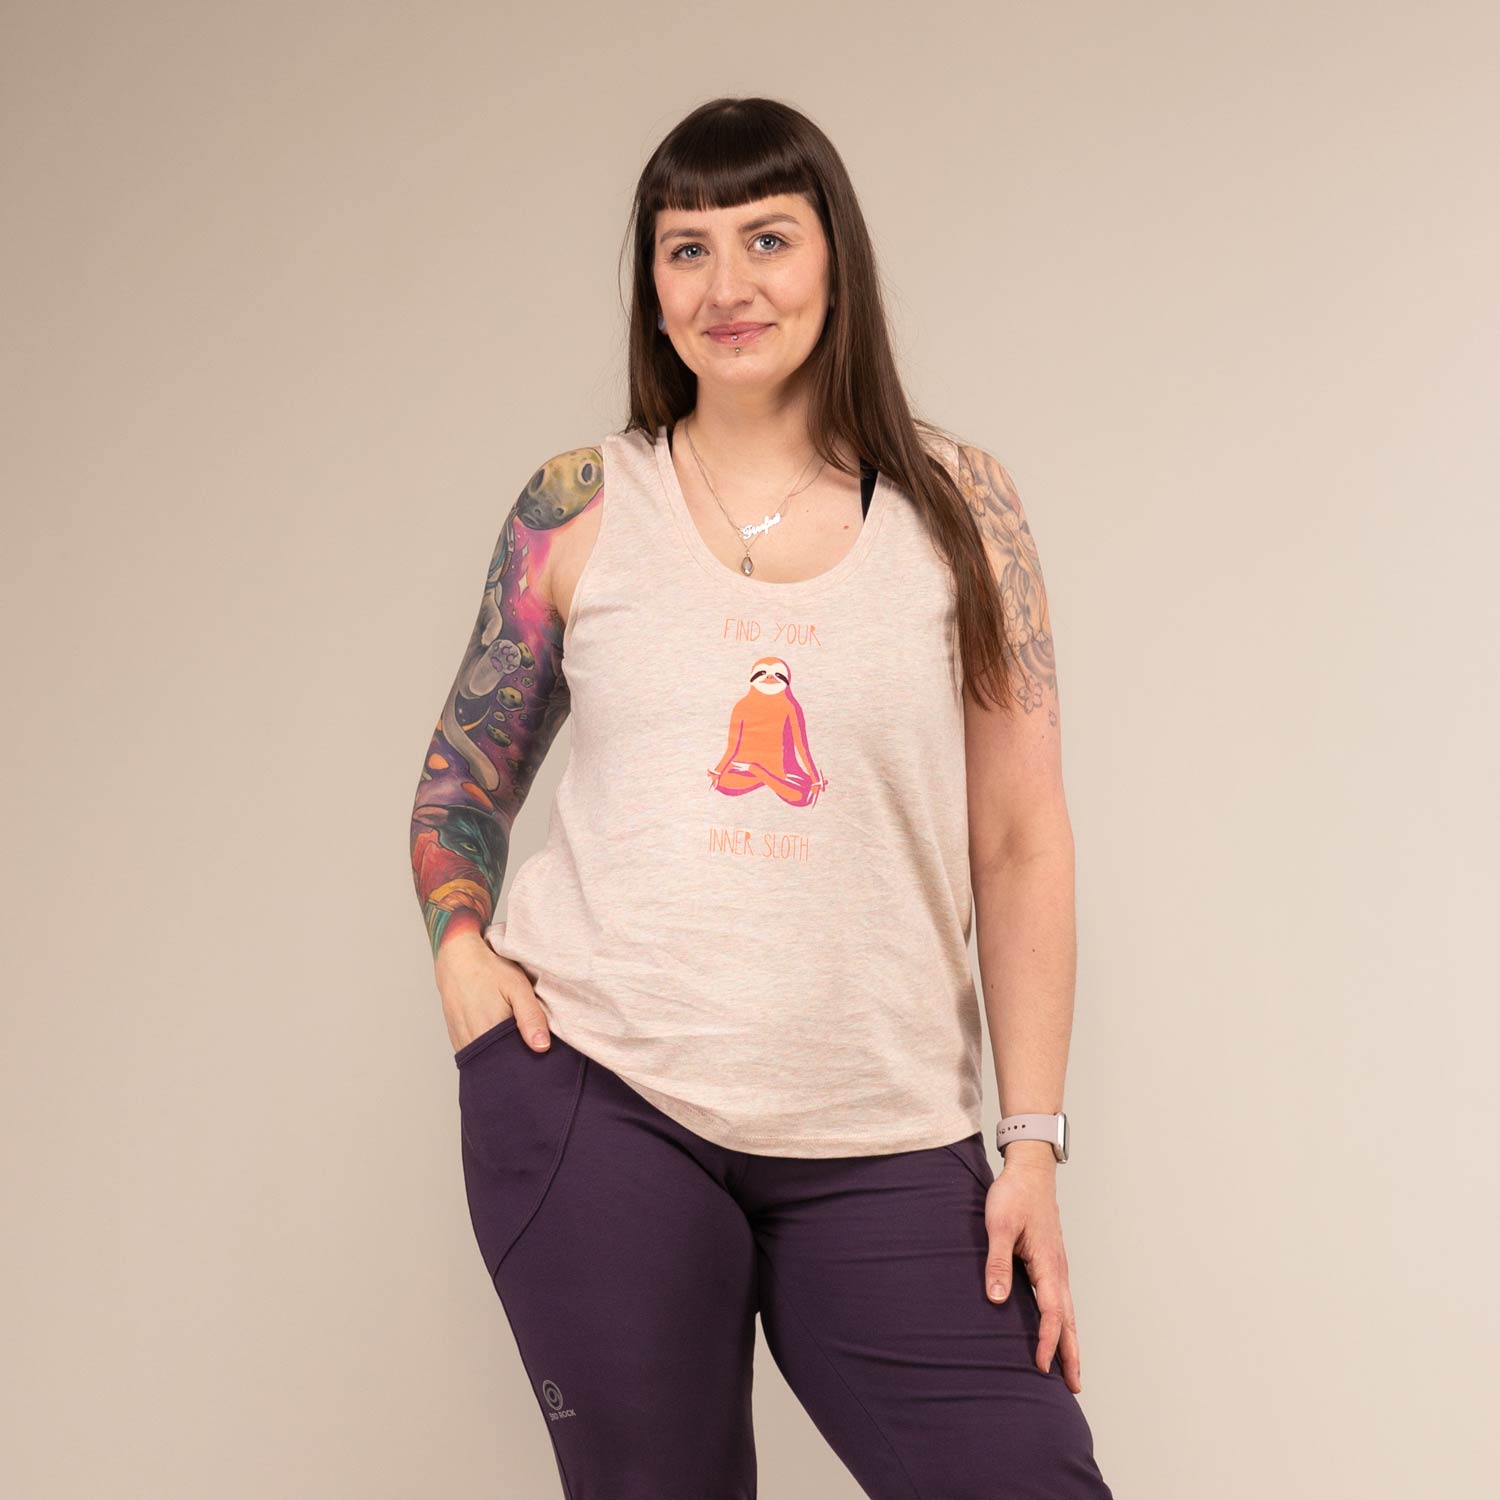 SLOTH VEST | Organic Scooped Cotton Vest | 3RD ROCK Clothing -  Laura is 5ft 6 with a 36" bust and wears a size M F